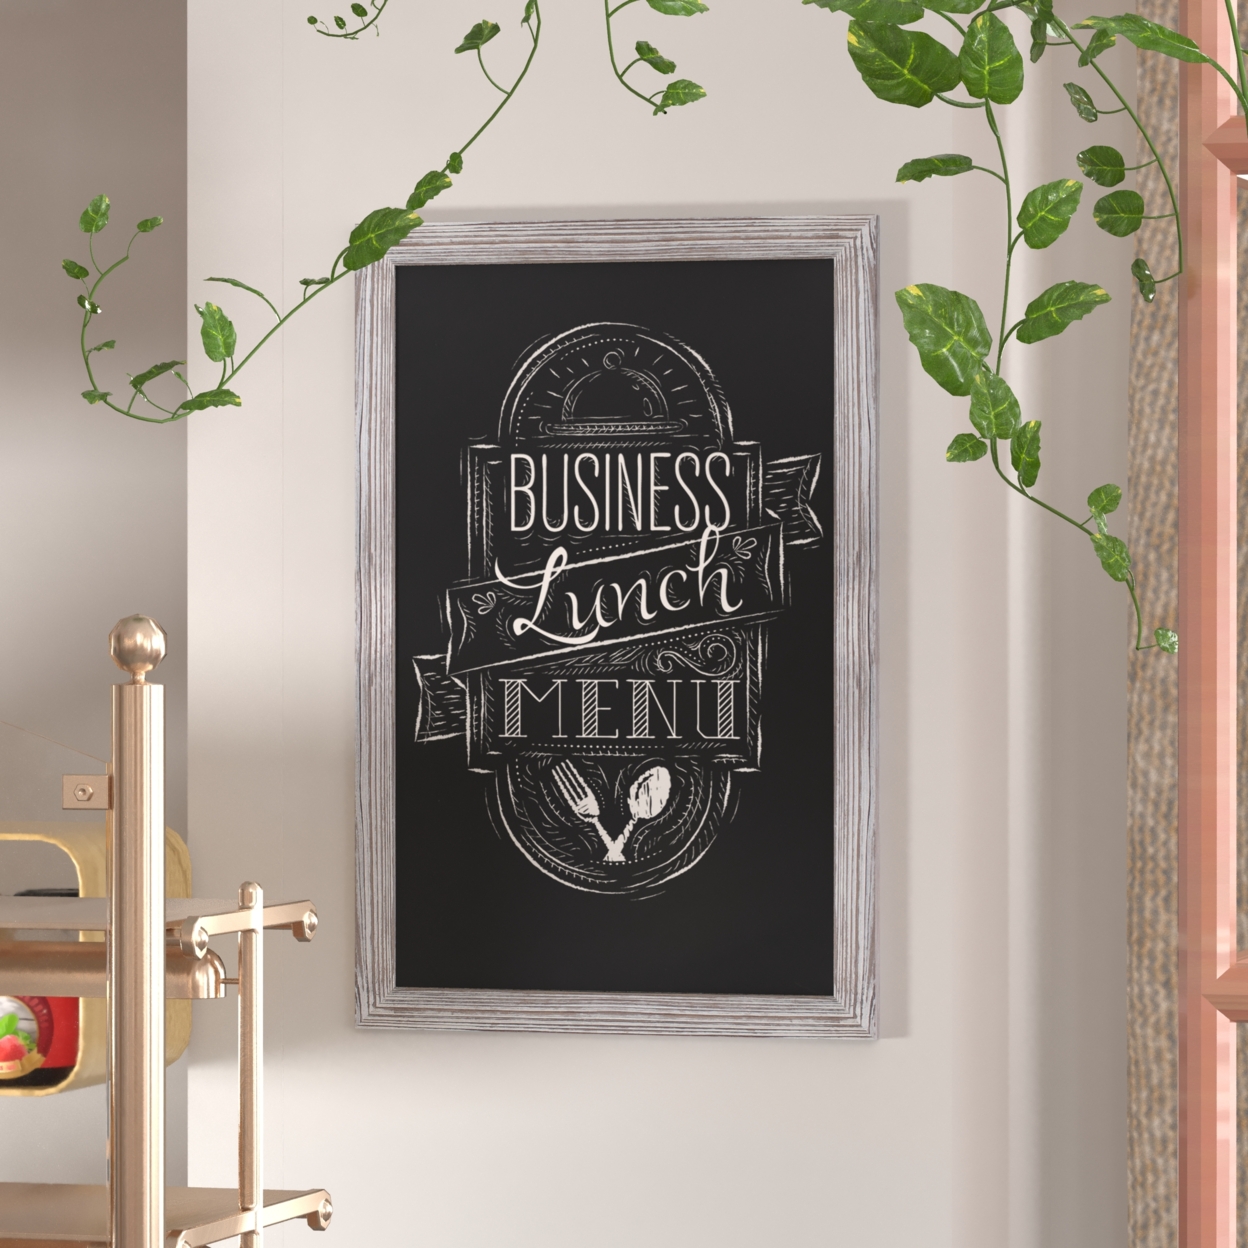 Wall Hanging Chalkboard, Washed White Wood Frame, Rough Hewn Texture